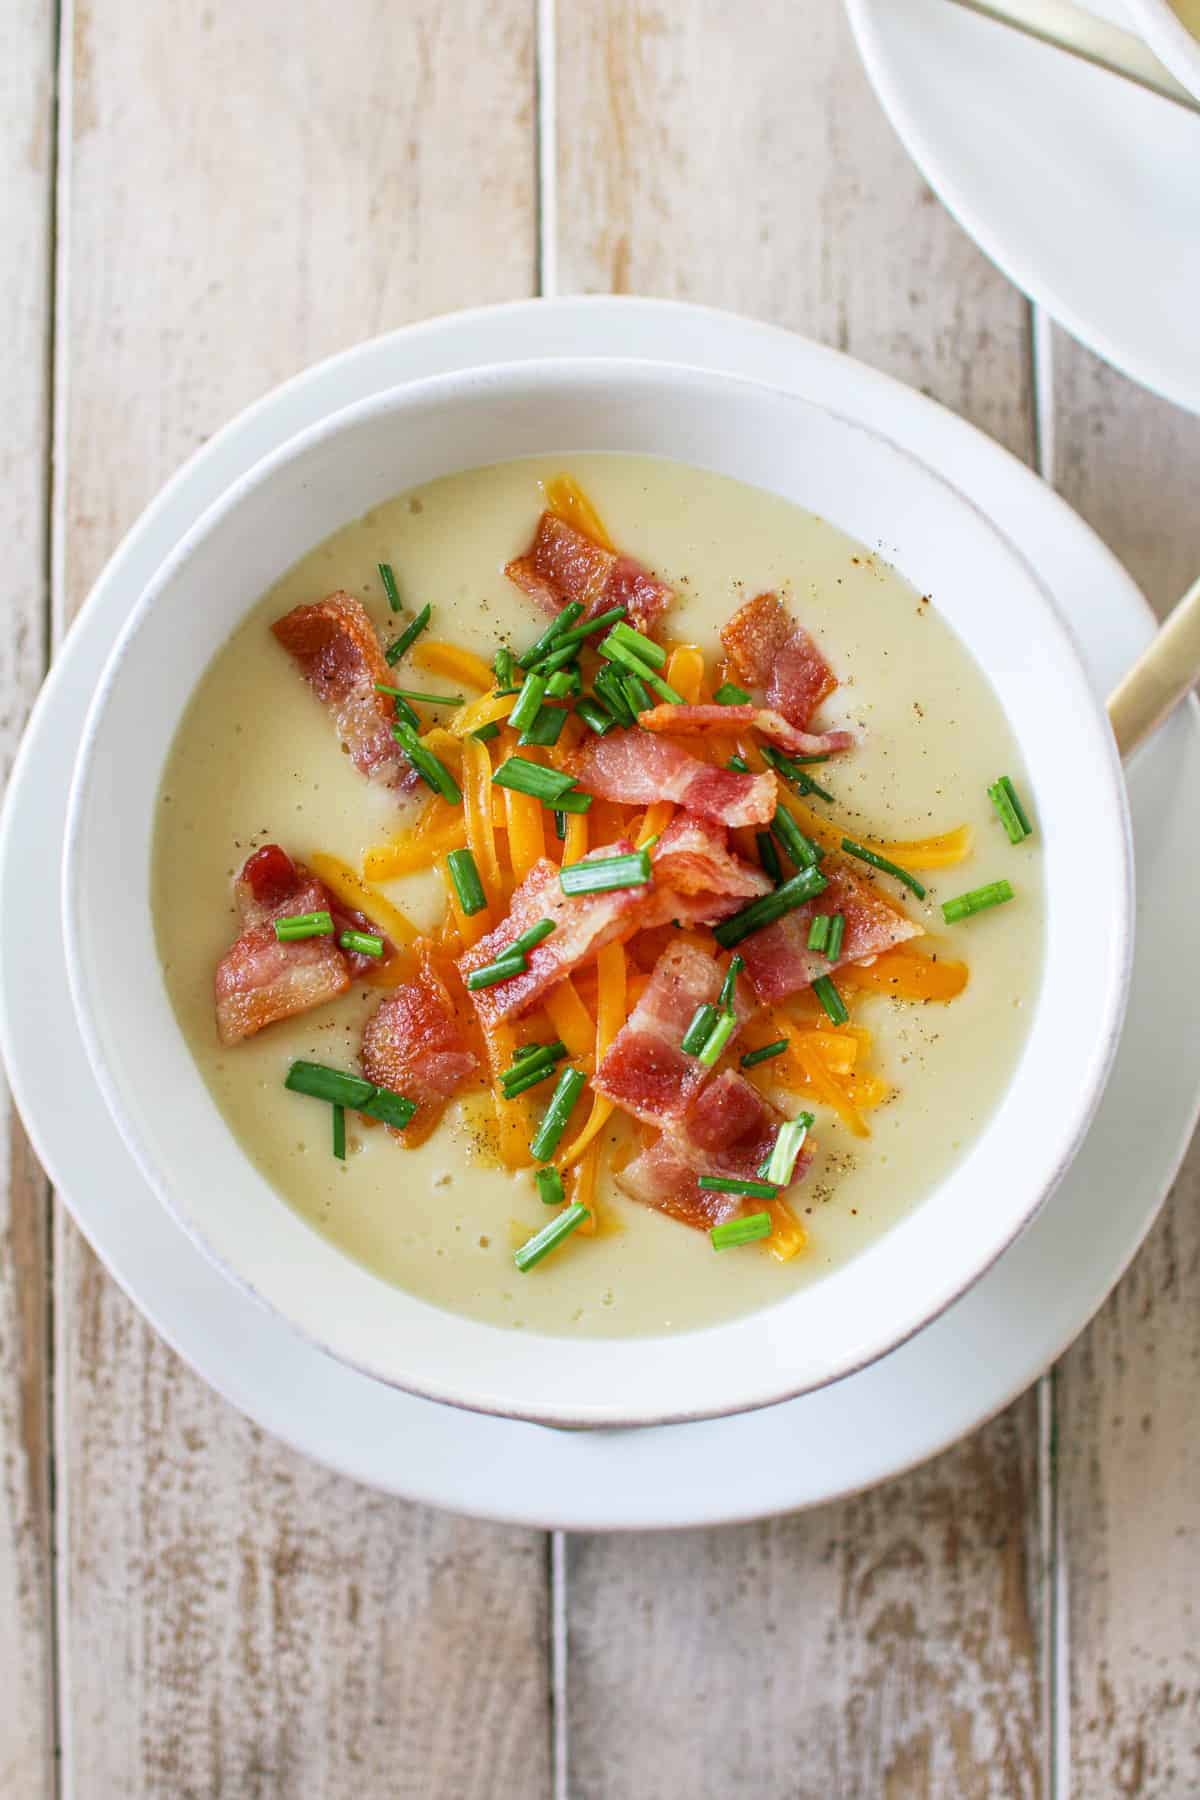 Overhead of a bowl of Potato Cauliflower Soup with thick cut shredded cheddar cheese, bacon, chives and pepper on top. The soup is on a brown wood plank table.